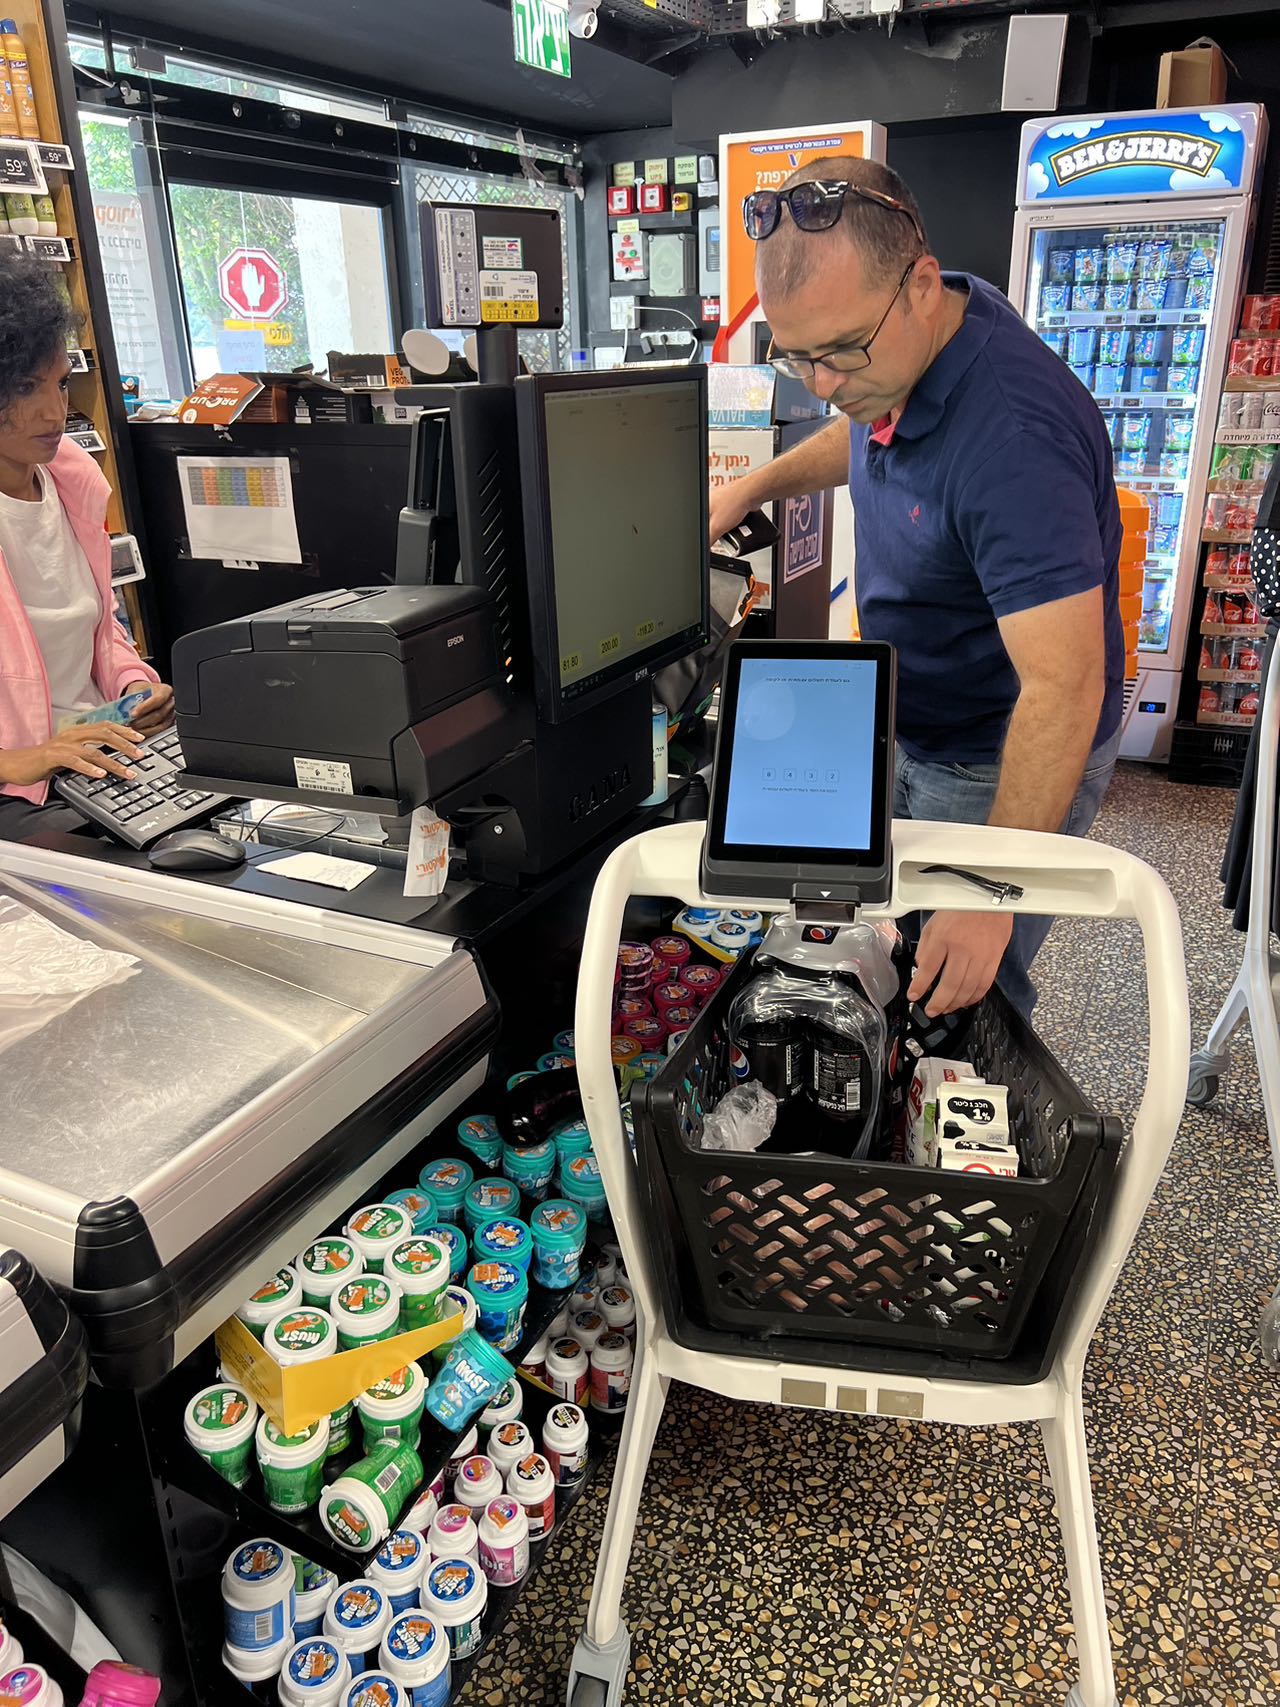 Superhii ltd deployed its smart shopping carts to the Israeli Victory store